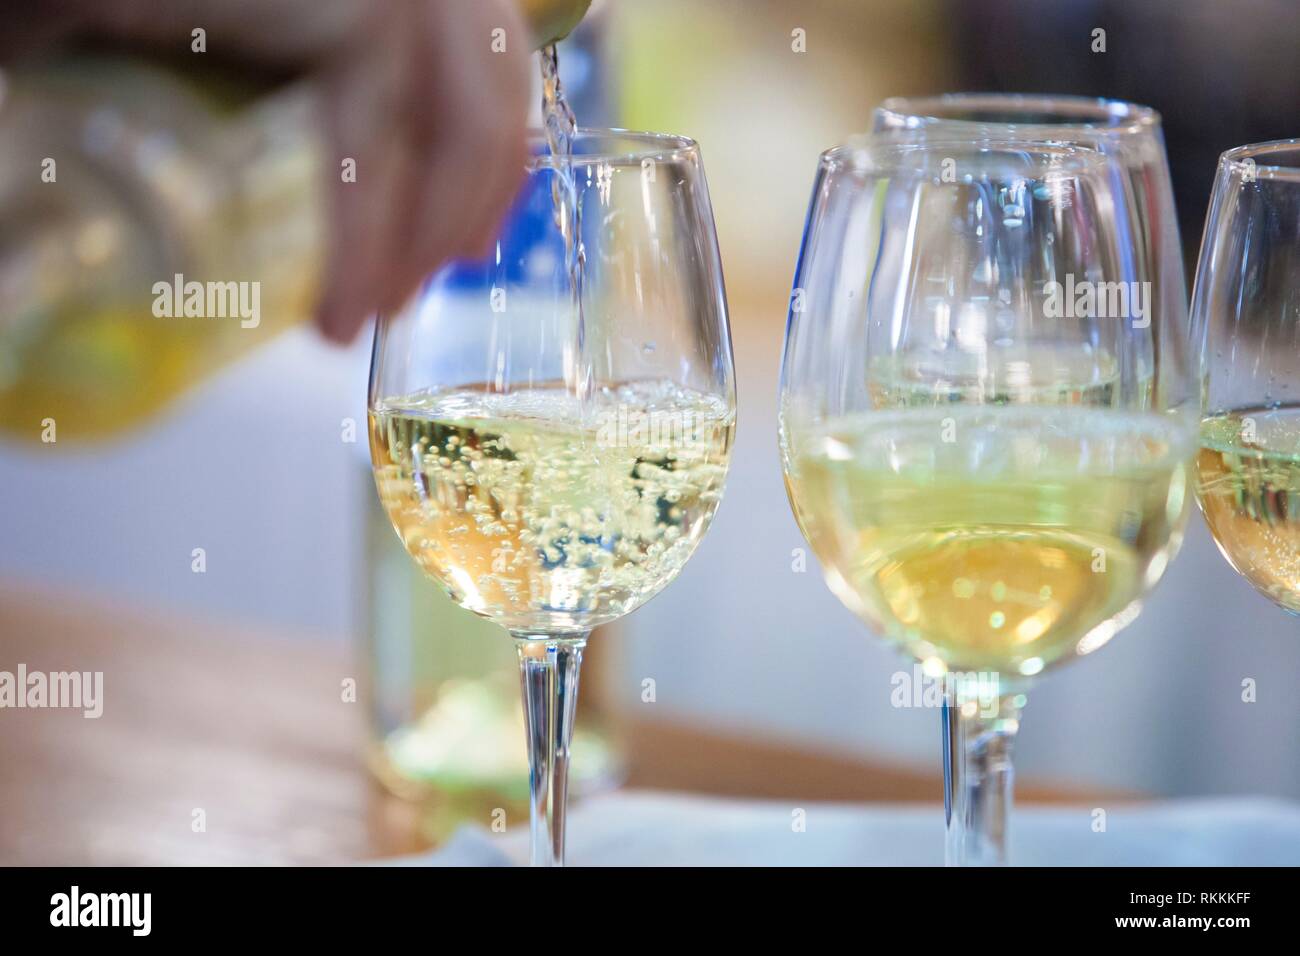 Glass with white wine poured on a cup. Soft focus. Stock Photo